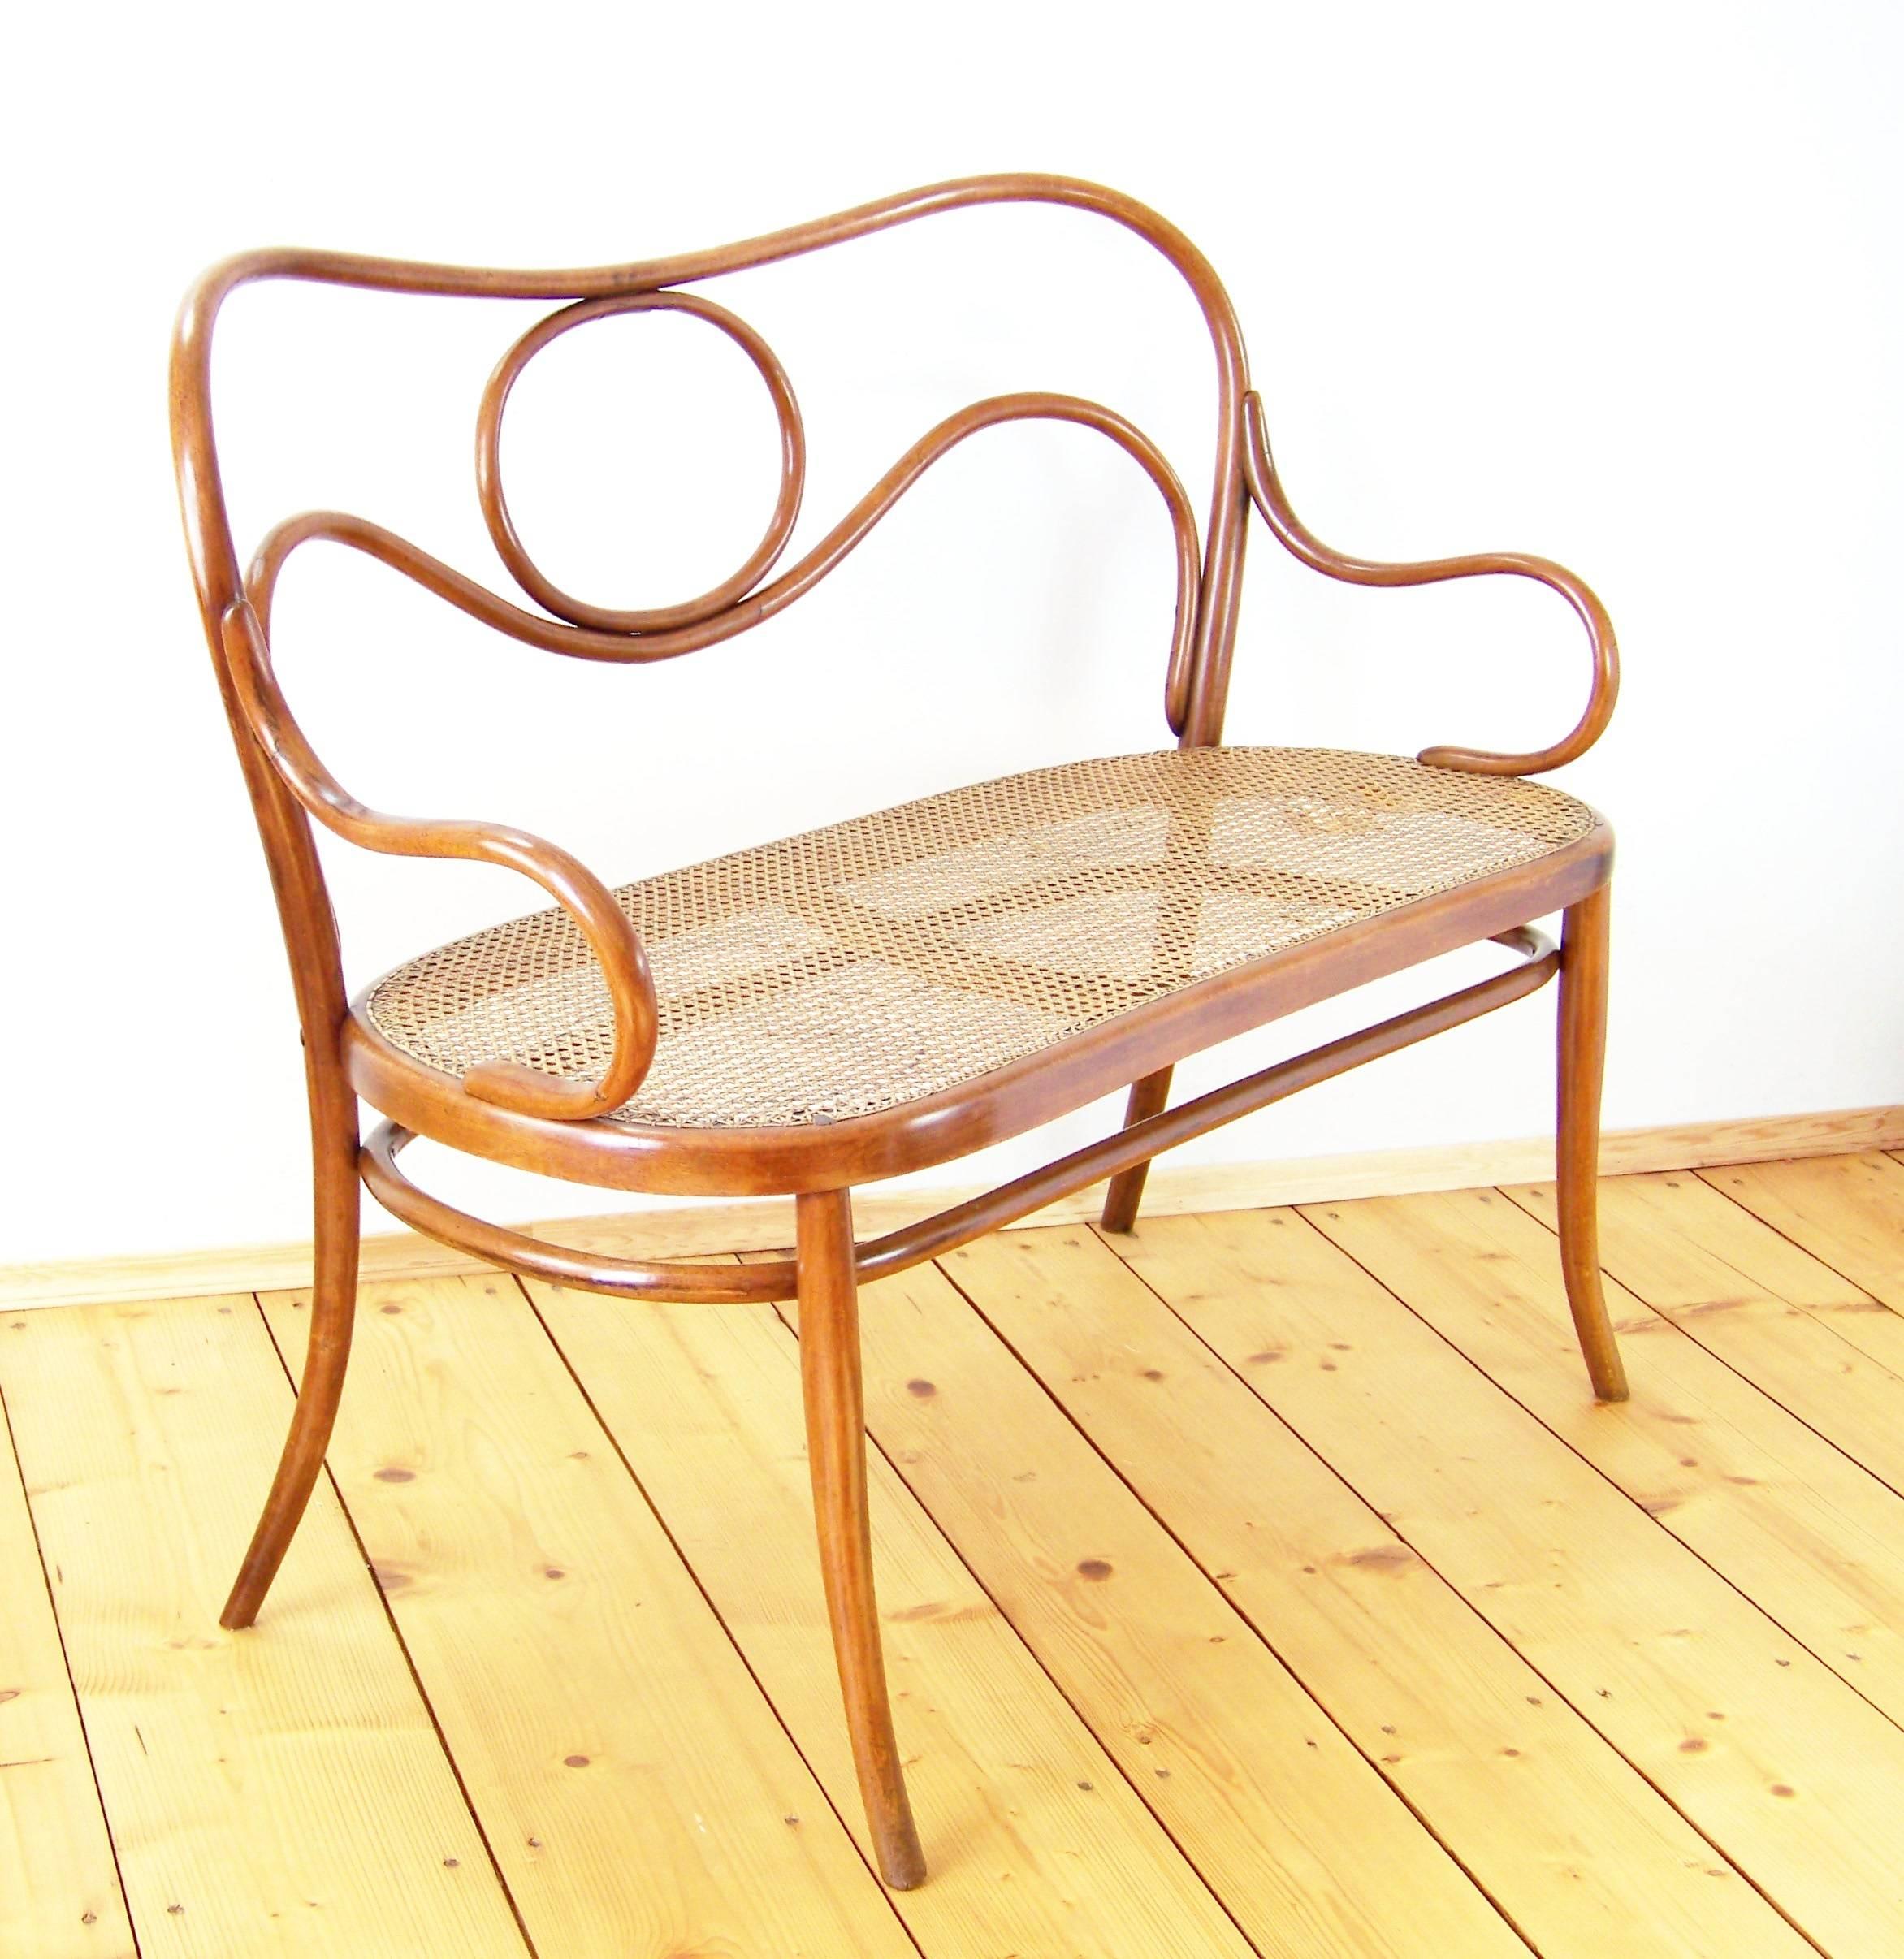 The oldest type of production! Manufactured in Austria by the Gebrüder Thonet company. In the production program was included around the Year 1873. Marked with paper label, which is used around years 1861-1881. Original state.